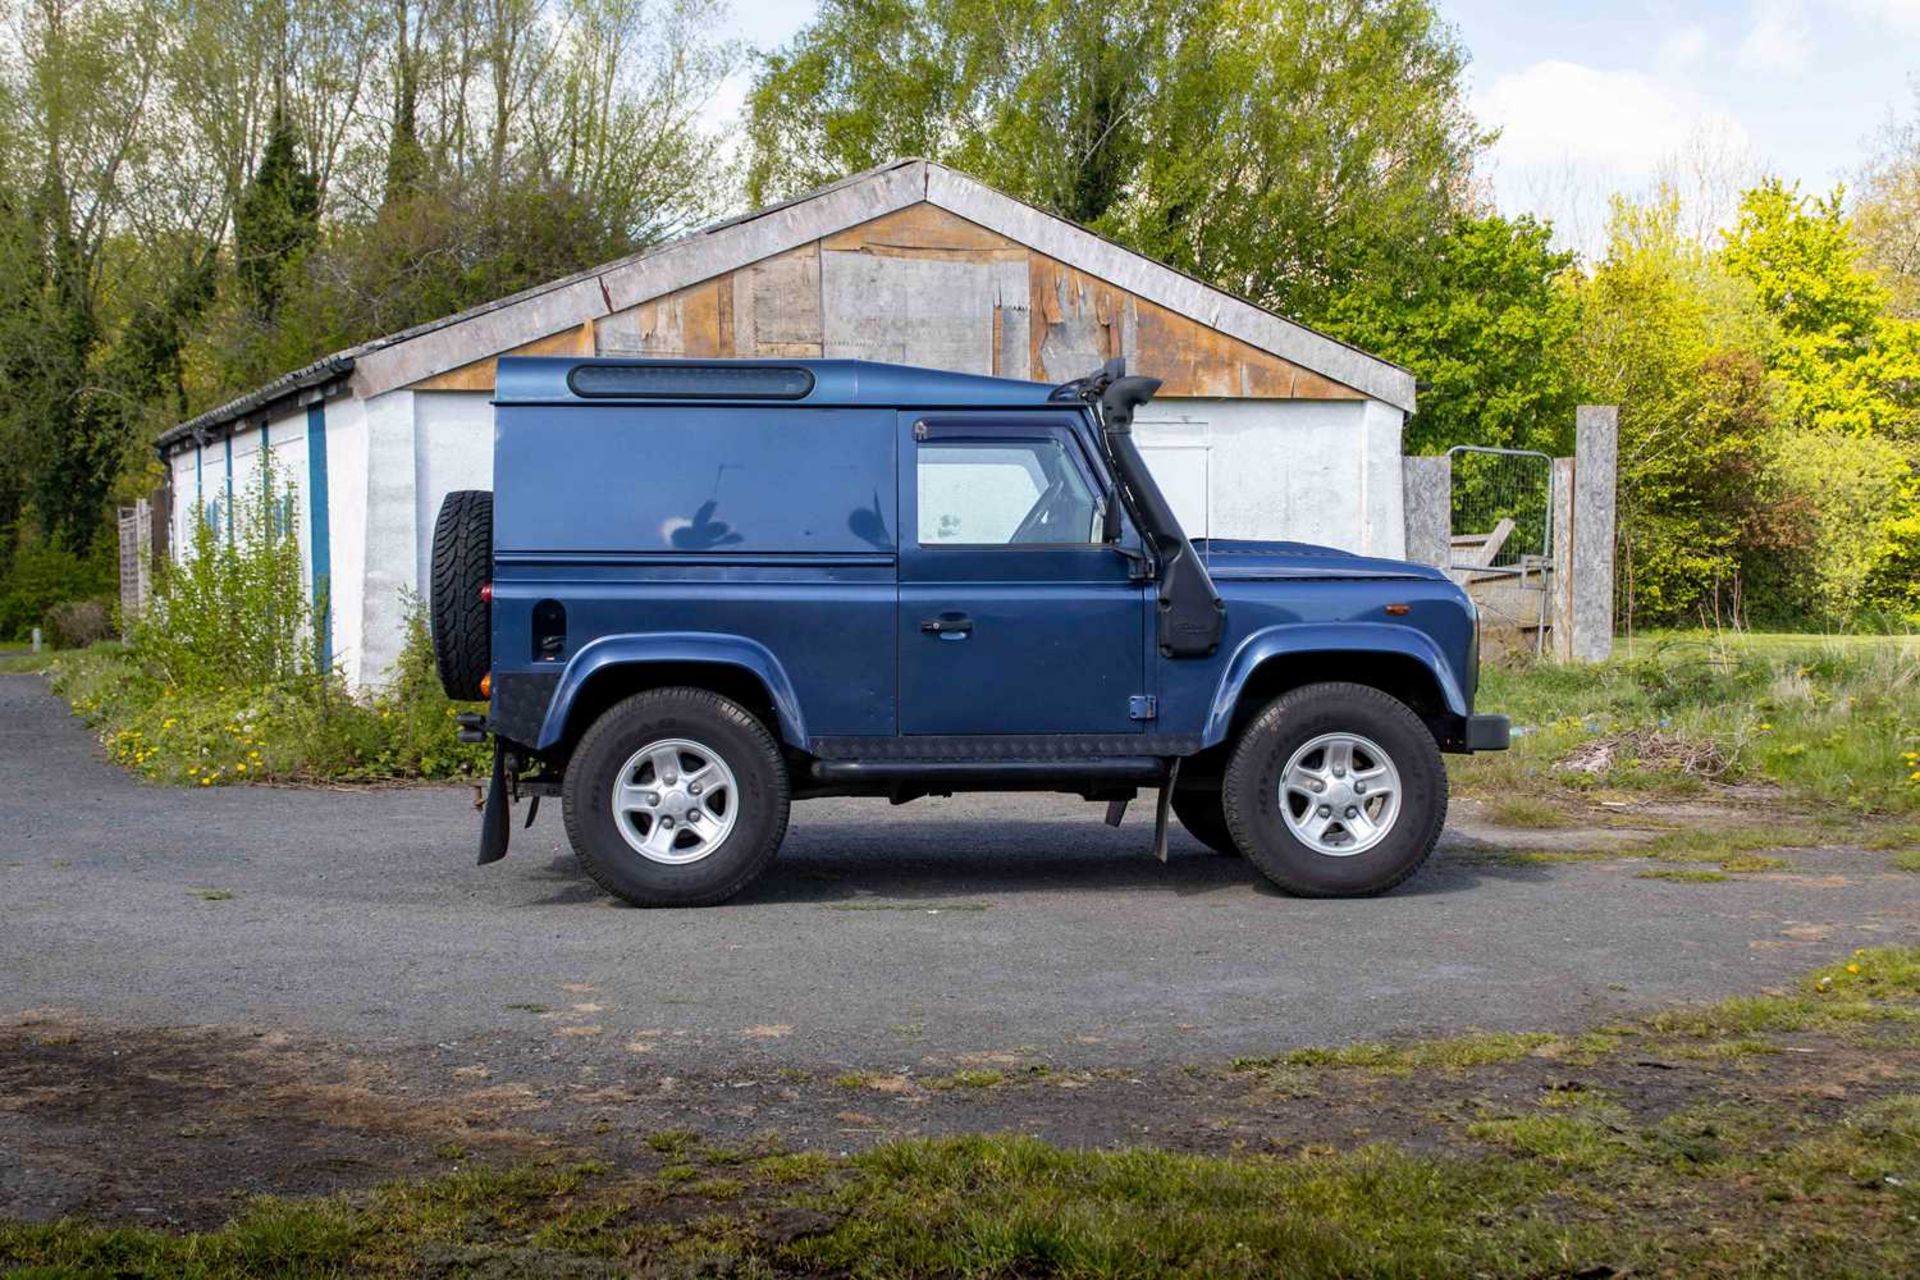 2007 Land Rover Defender 90 County  Powered by the 2.4-litre TDCi unit and features numerous tastefu - Image 13 of 76